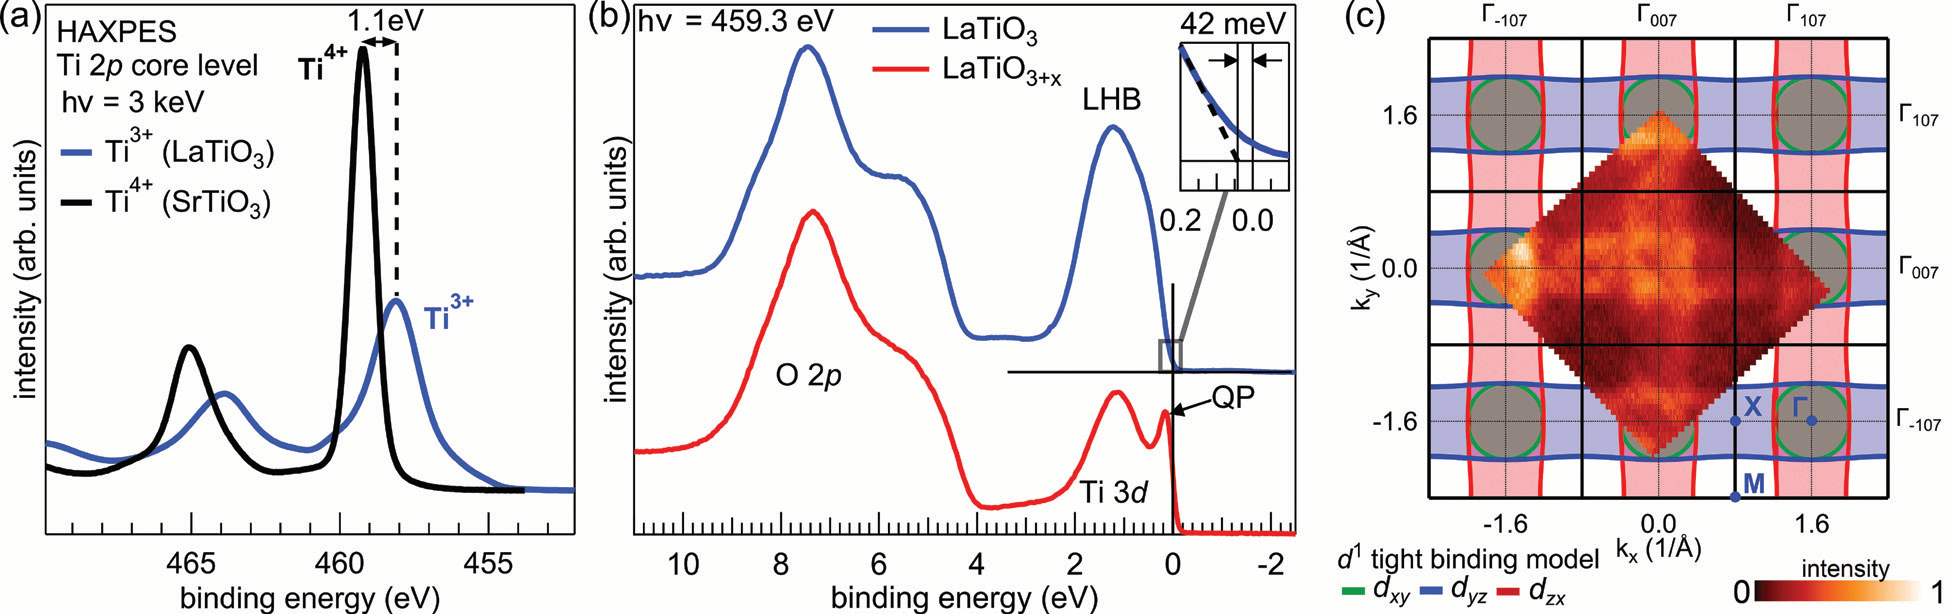 Figure 2: (a) The titanium valence is monitored by core-level photoelectron spectroscopy of the Ti 2p line. The absence of any sizable Ti<sup>4+</sup> signal in the spectrum from the LaTiO<sub>3</sub> film (blue line) verifies<br/>the correct oxygen stoichiometric; (b) Resonant photoemission at the Ti L absorption threshold allows to investigate the Ti 3d valence band states. Whereas the stoichiometric sample exhibits<br/>a gapped spectrum, the oxygen excess doped thin film is metallic as indicated by the quasiparticle peak (QP) and the Fermi cutoff; (c) Fermi surface measured by resonant SX-ARPES at the Ti L<br/>absorption threshold depicted together with a tight binding model for a filling of d<sup>1</sup>.